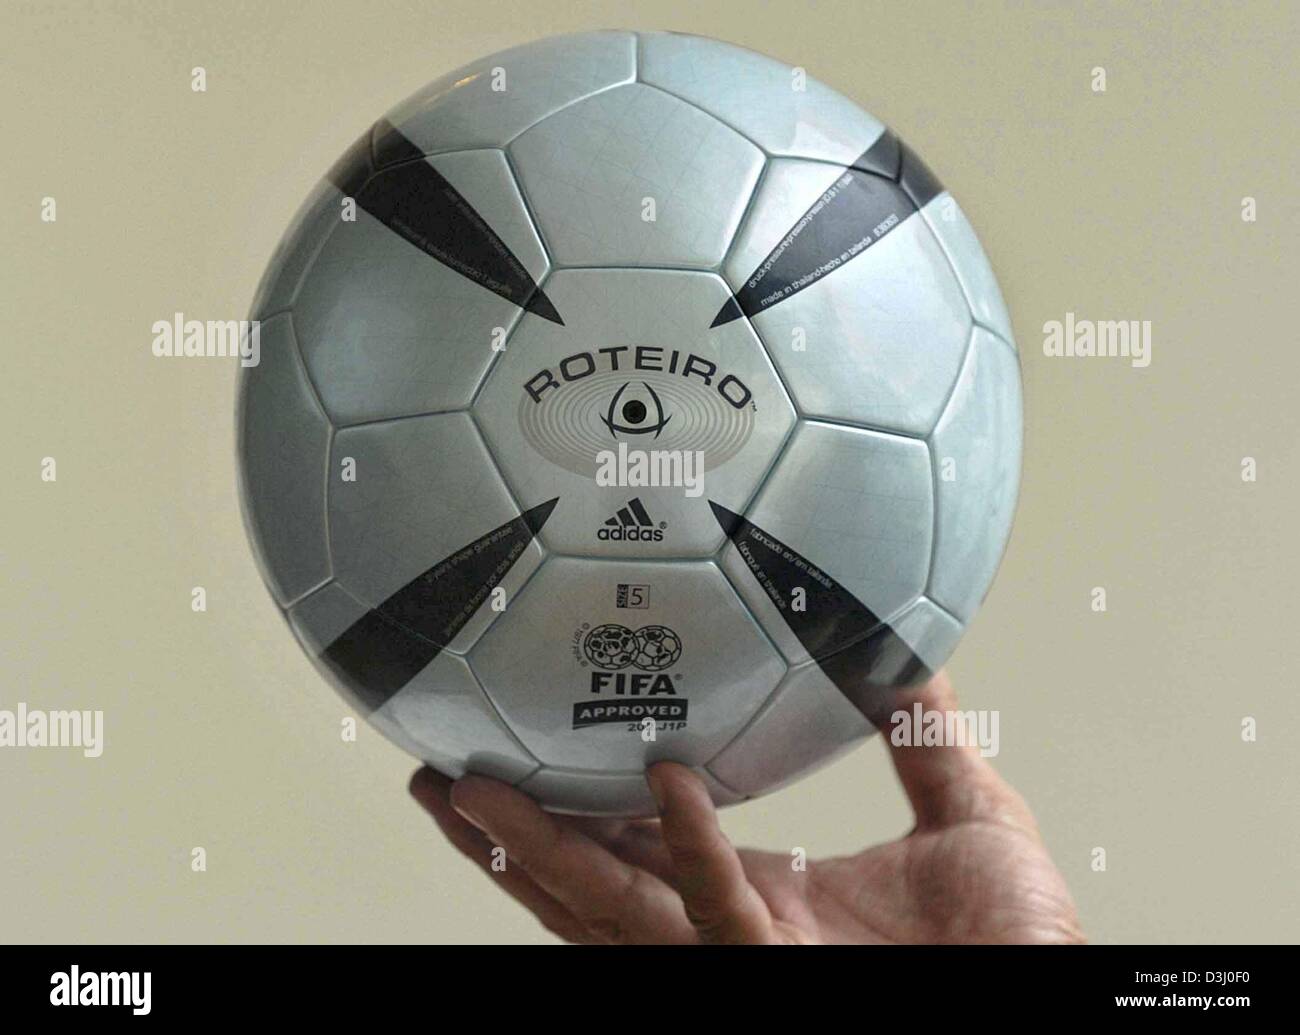 dpa) - The official ball for the Euro 2004 soccer championships, called  'Roteiro', is presented in Almancil,